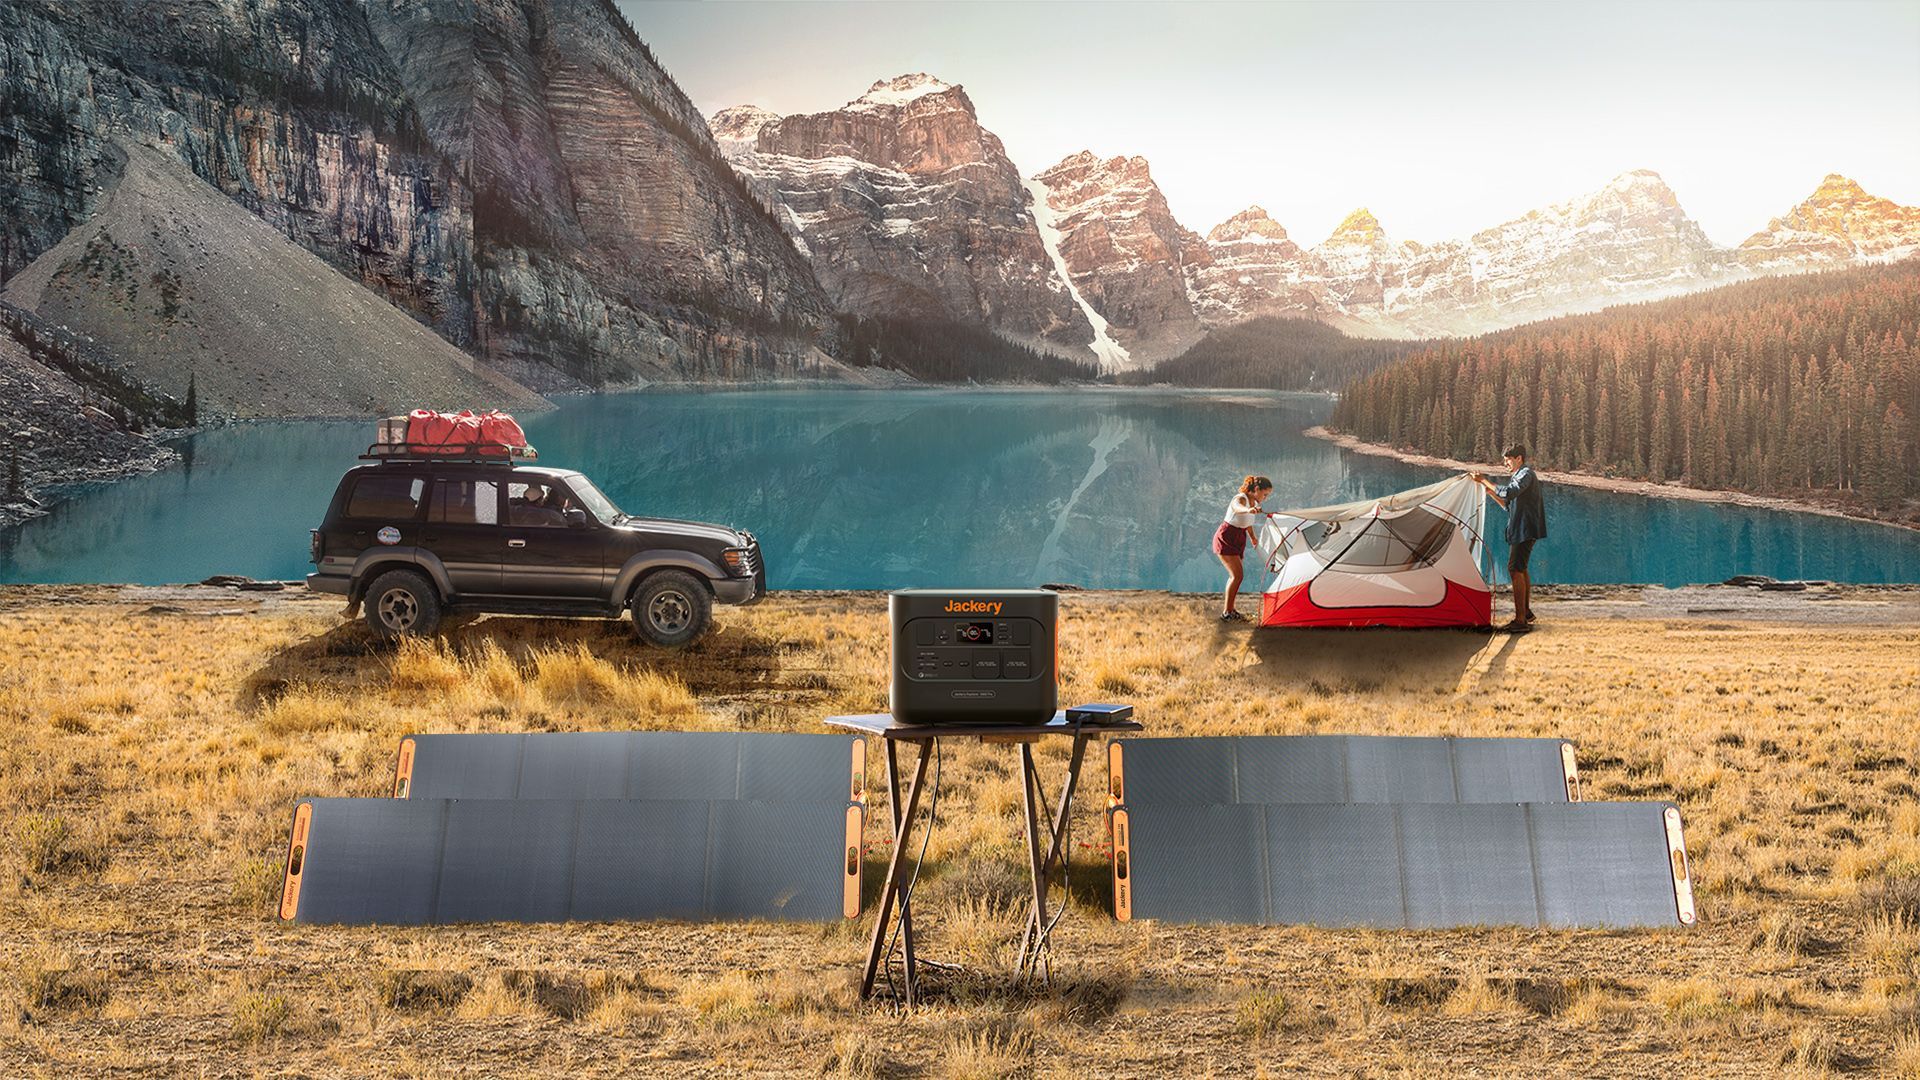 The speed of sunlight: New Jackery Solar Generator 1000 Pro enables fast solar charging photo 6